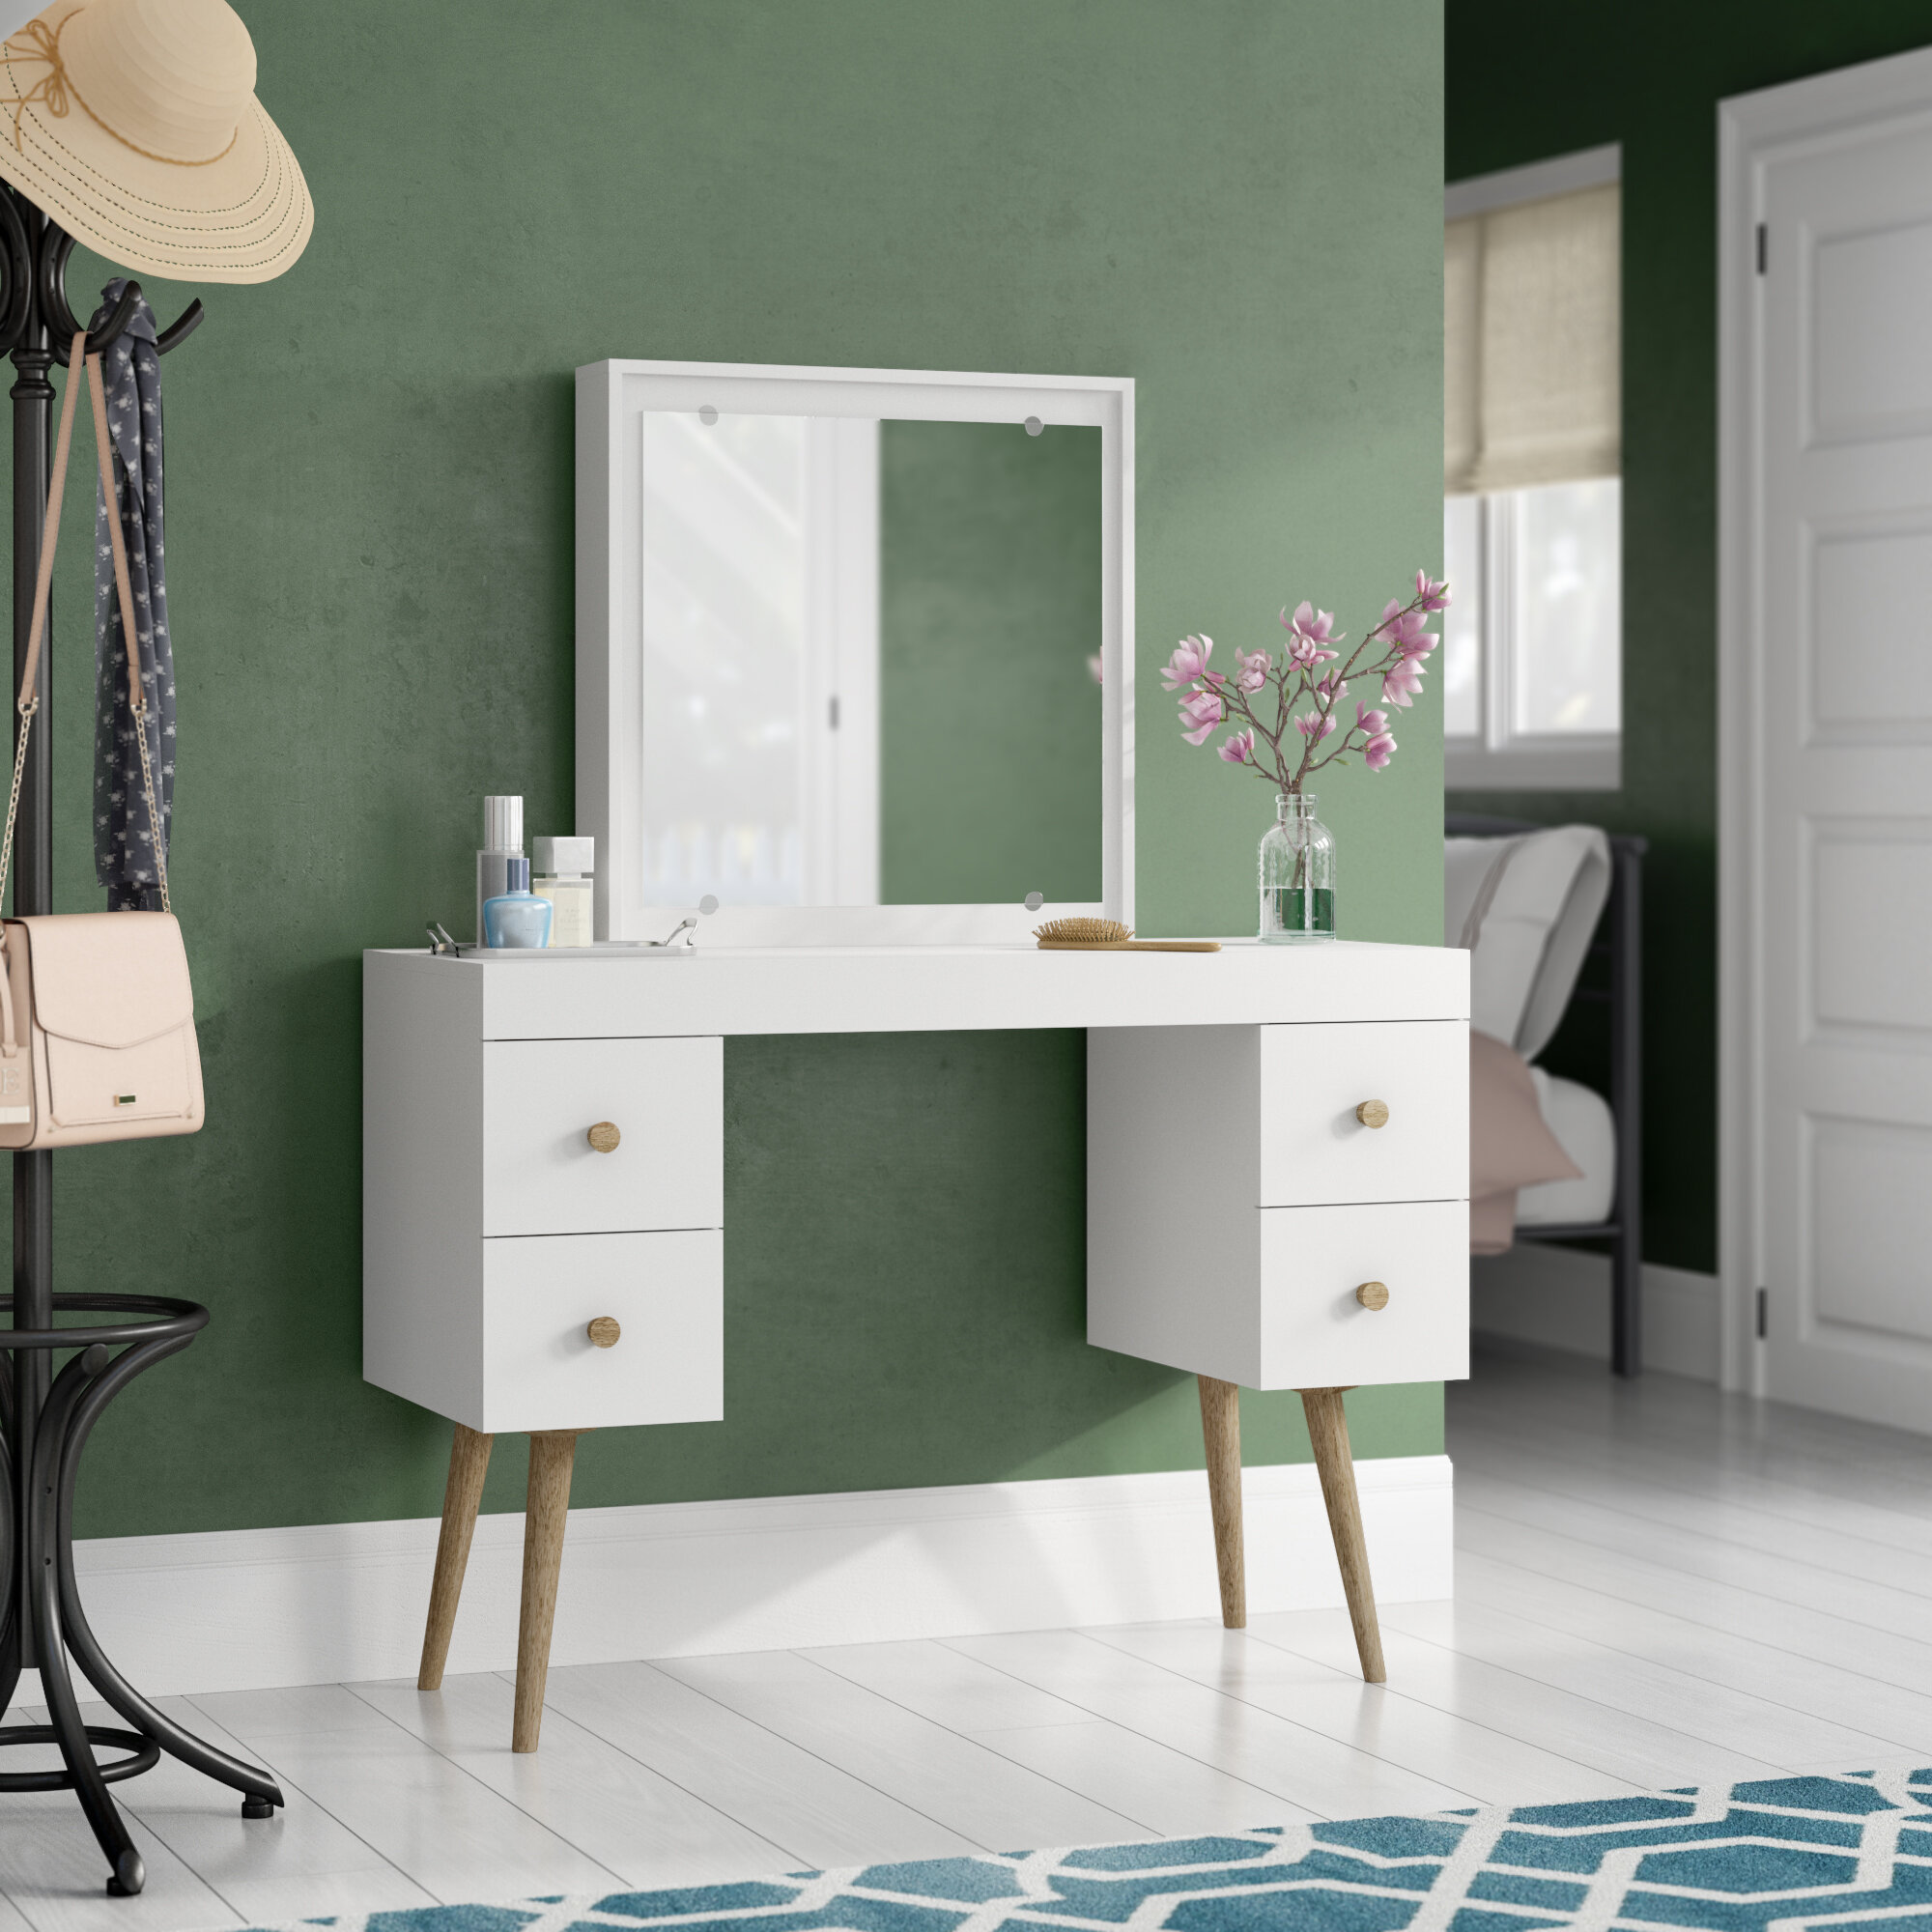 Makeup Tables And Vanities You Ll Love In 2020 Wayfair,Design Your Own Kitchen Online Free